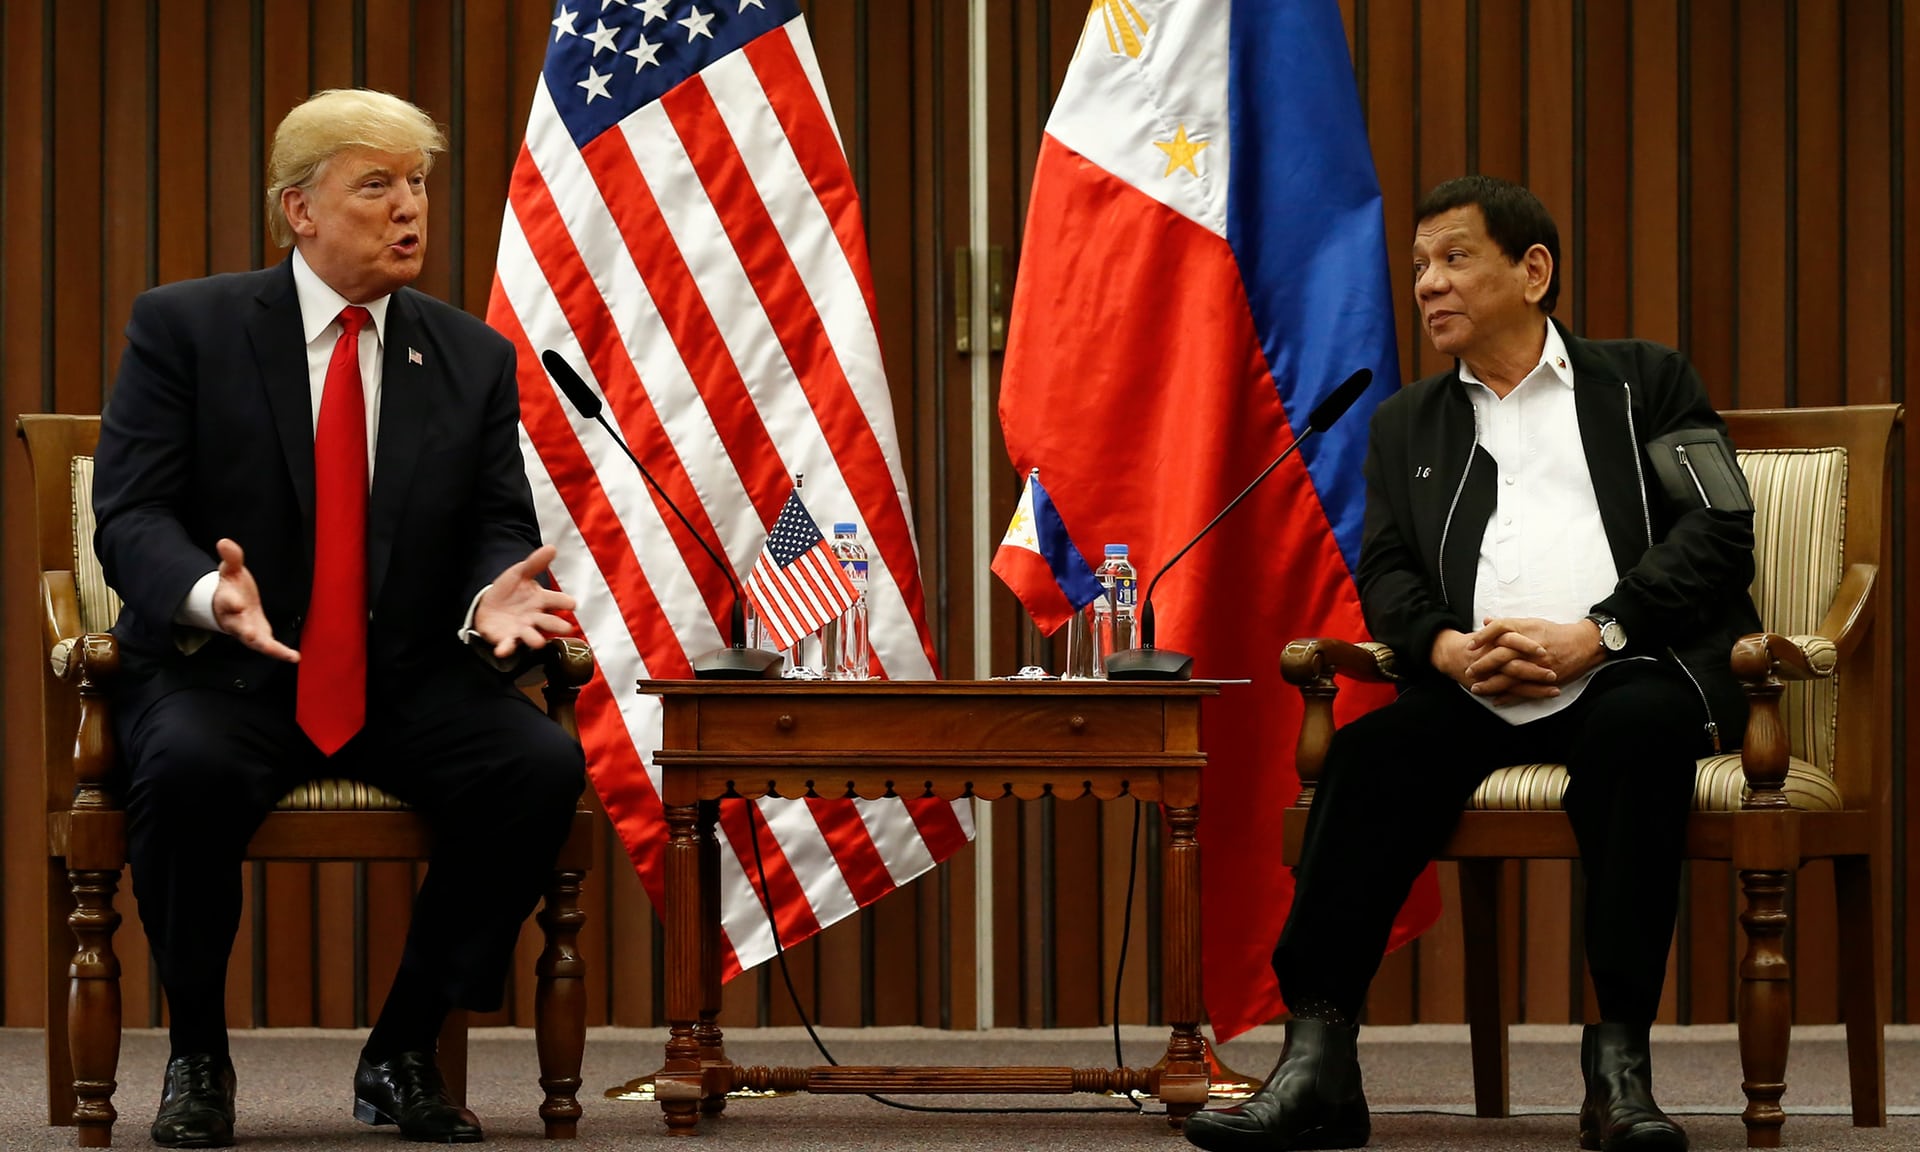 President Trump In Philippines On Last Leg Of 5-Nation Asia Trip